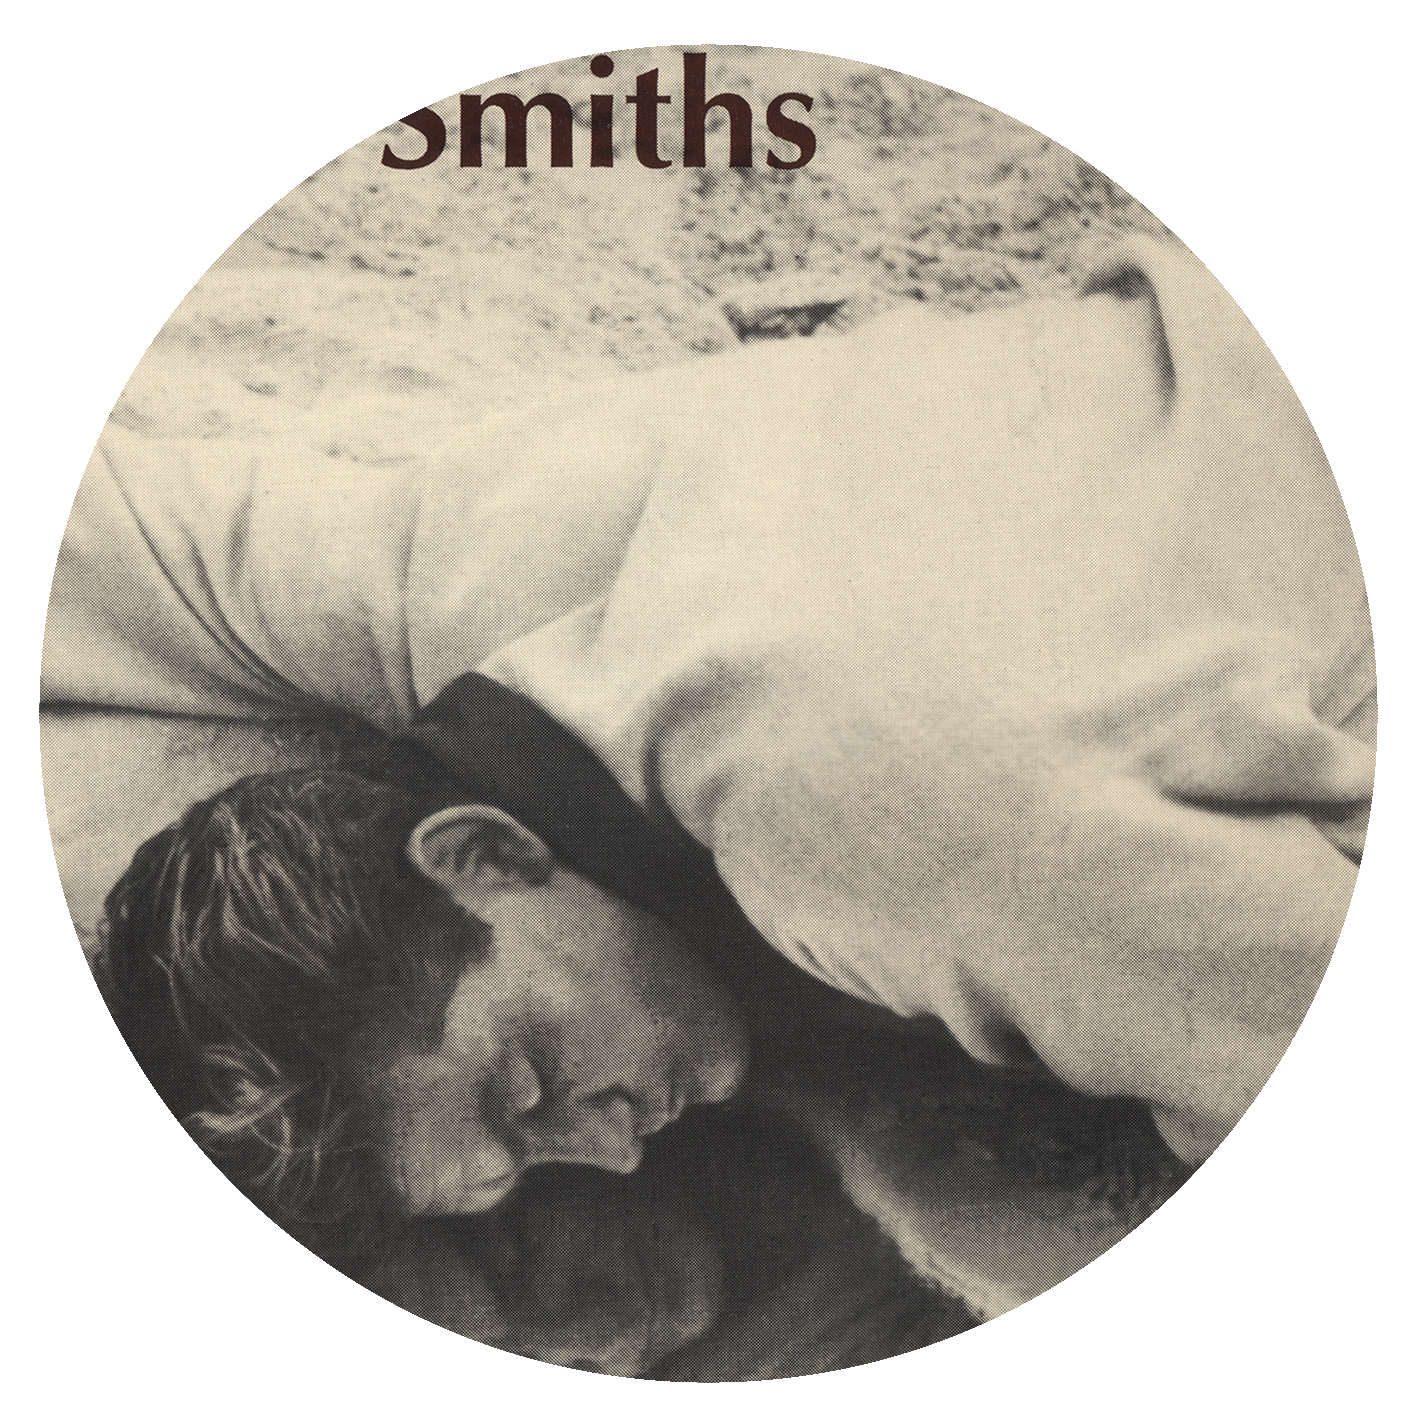 The Smiths - This Charming Man - UK 12" - 1983 - Cover